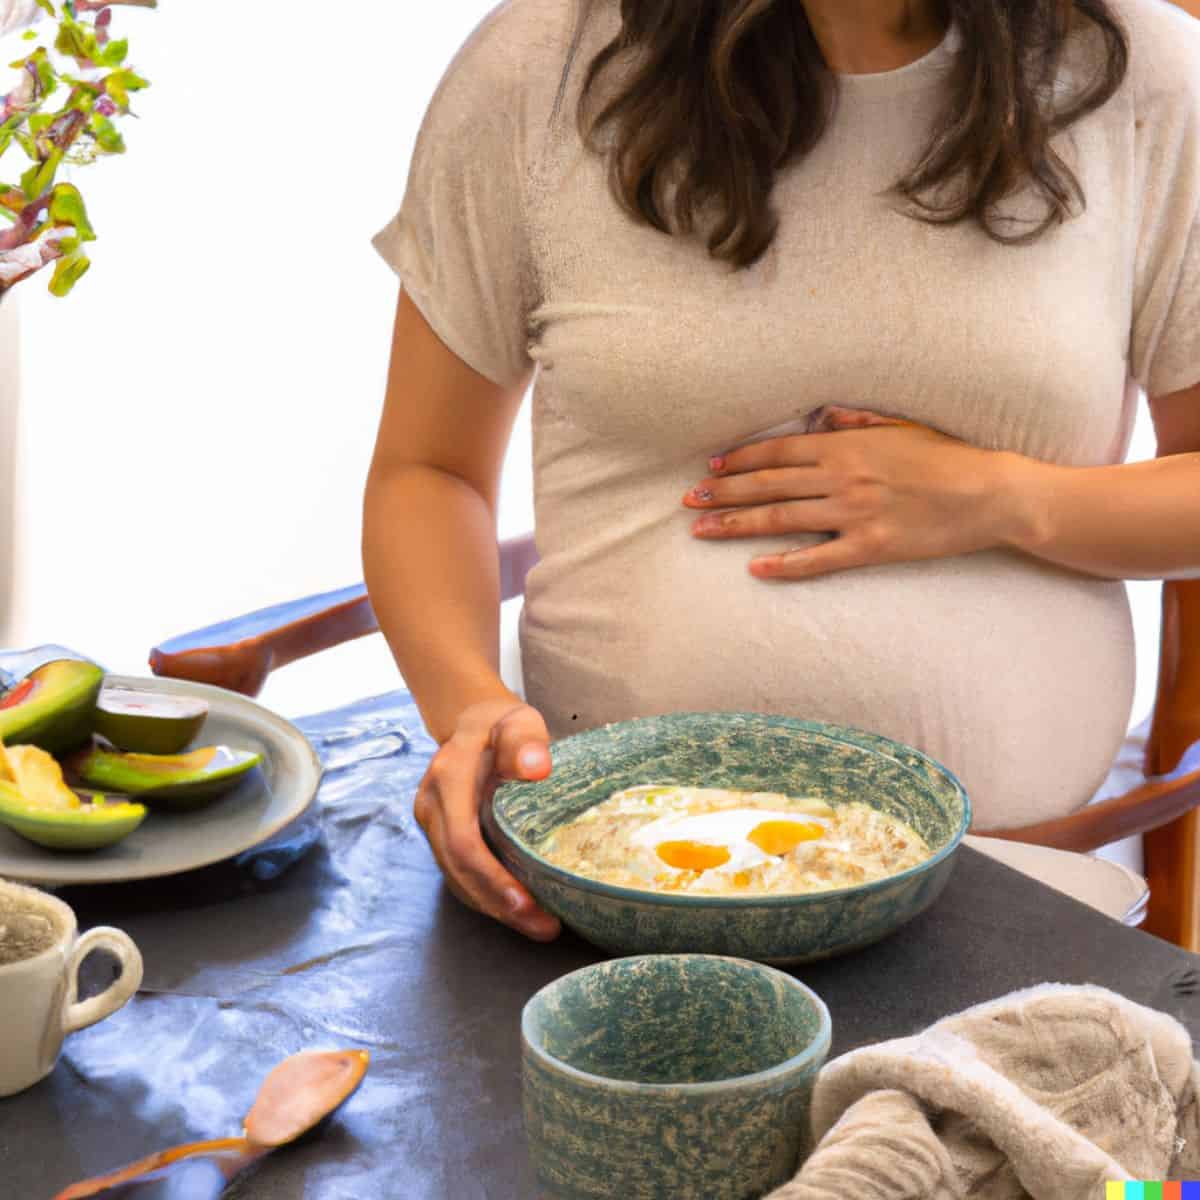 pregnant female with gestational diabetes eating breakfast of eggs and avocados.